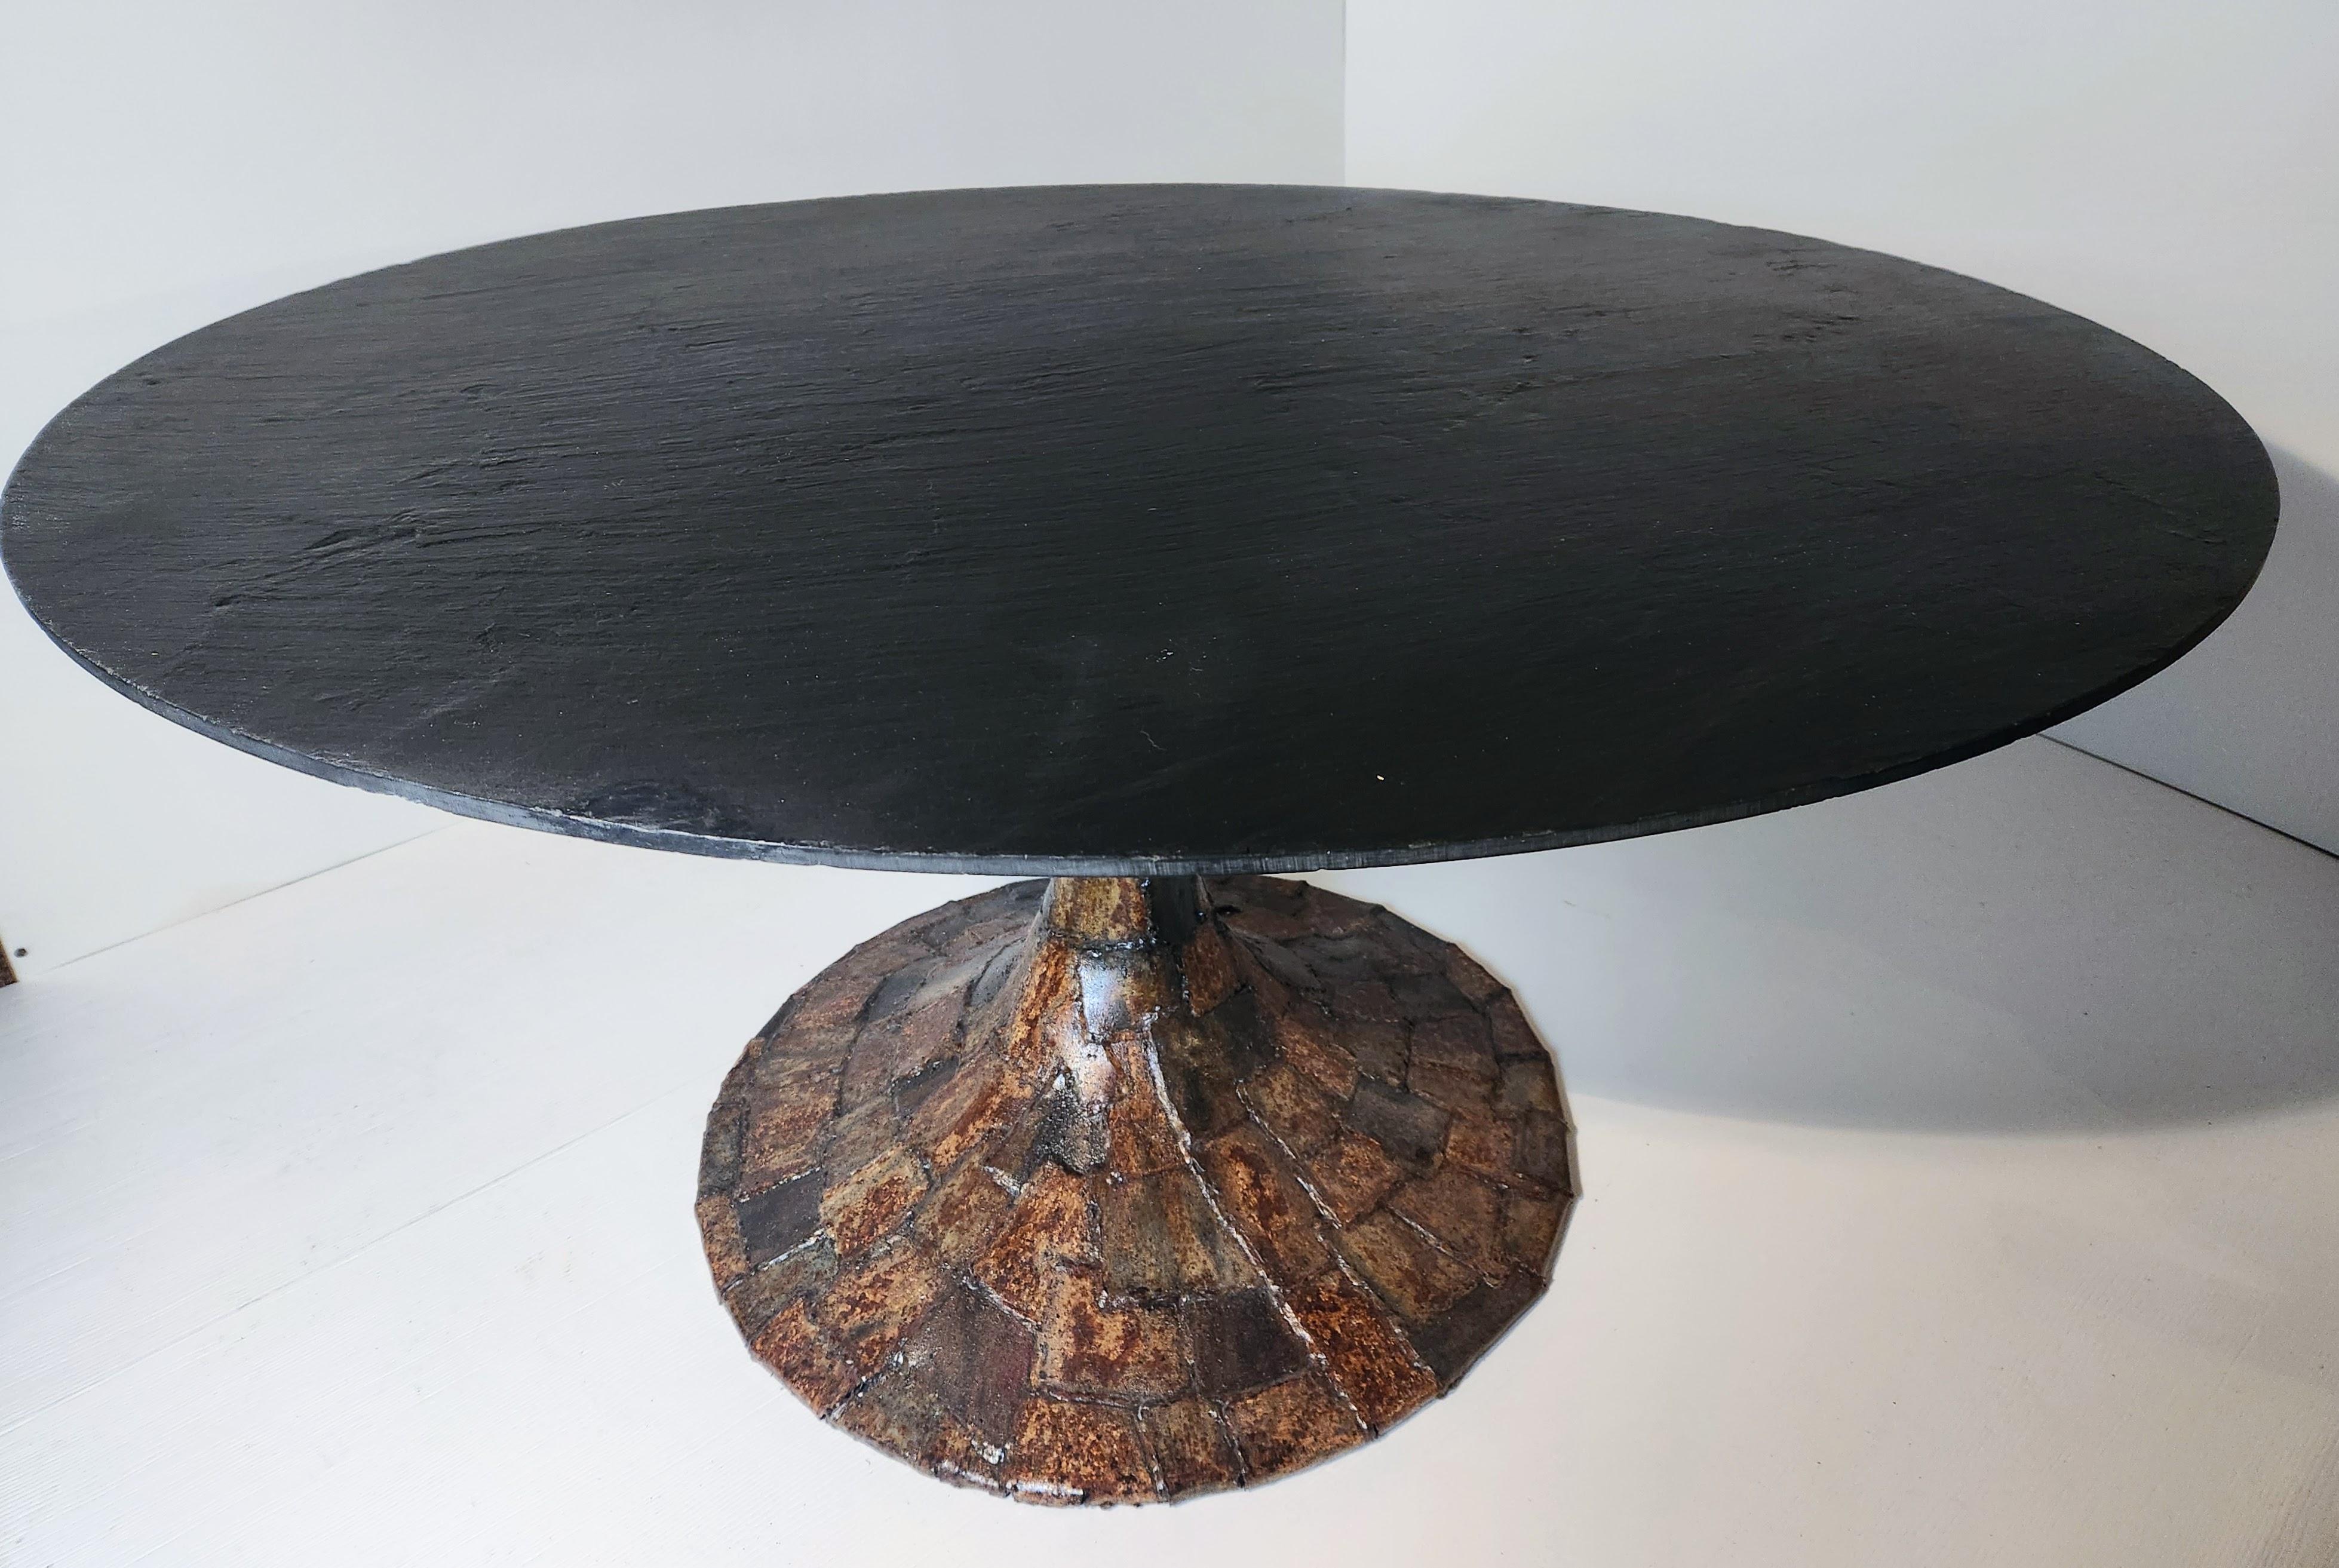 Early Paul Evans rare and wonderful dining table with three prong support atop of a welded enameled steel base composed of an overlaid welded steel patchwork of panels with an intriguing surface composition of which he and Dorsey Reading were